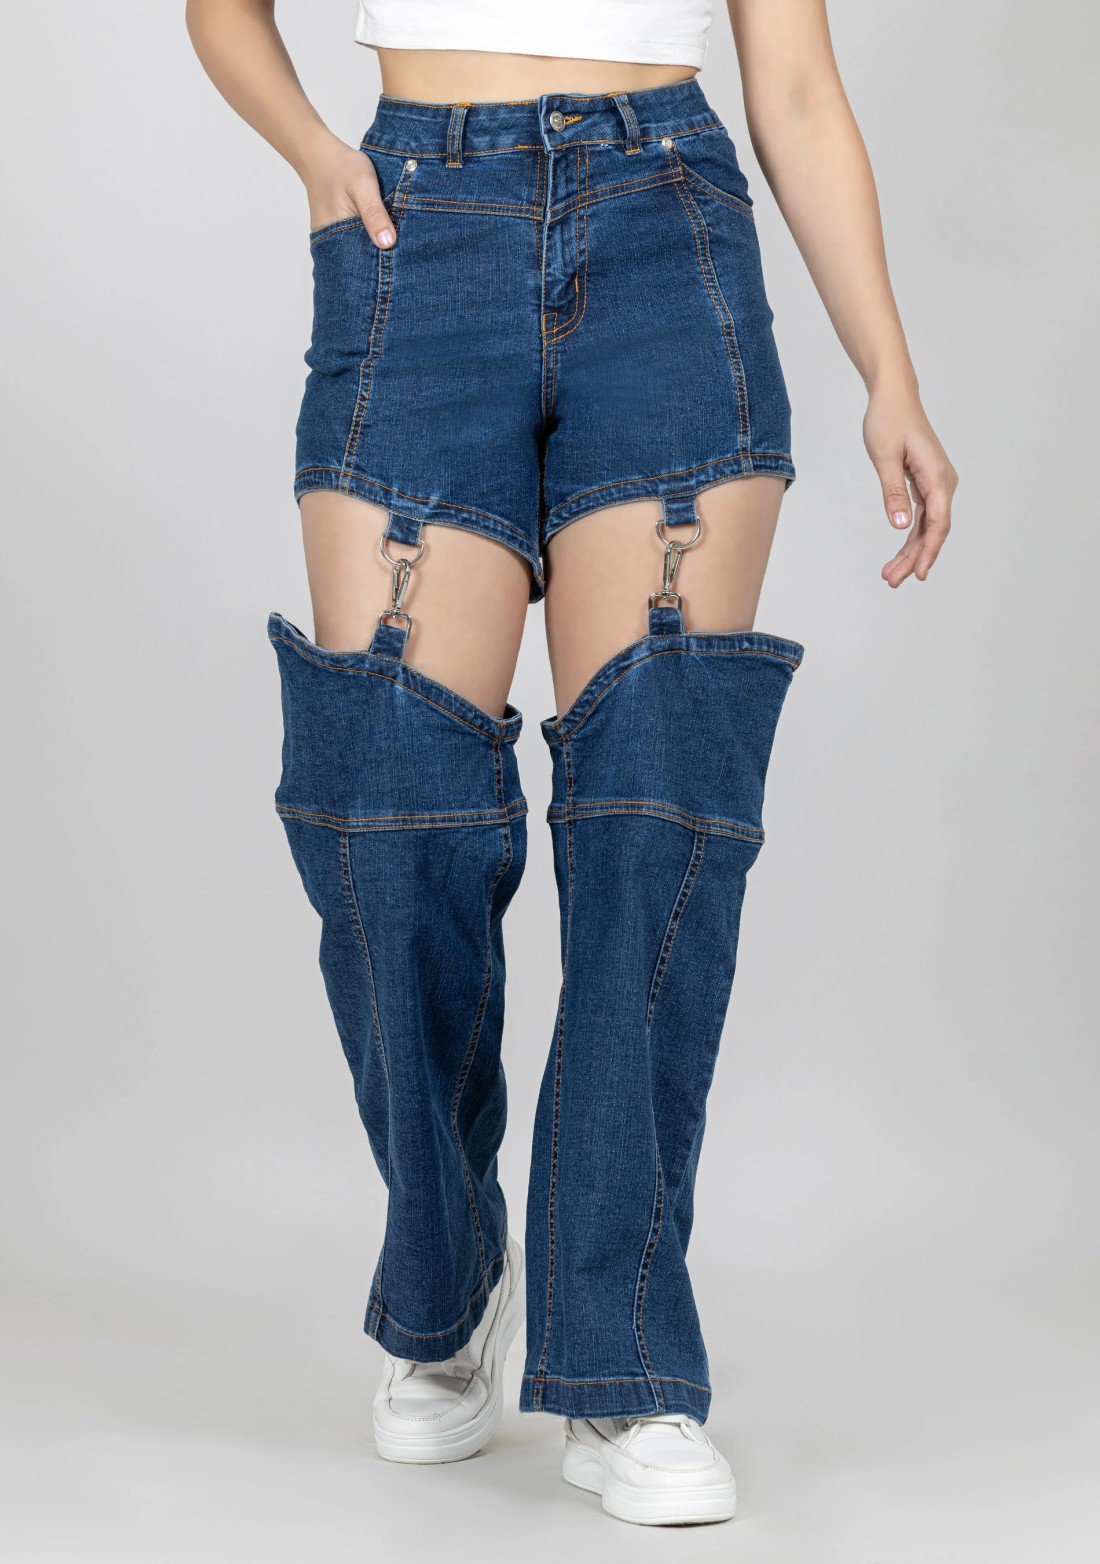 Girls Blue Jeans Price in India - Buy Girls Blue Jeans online at Shopsy.in